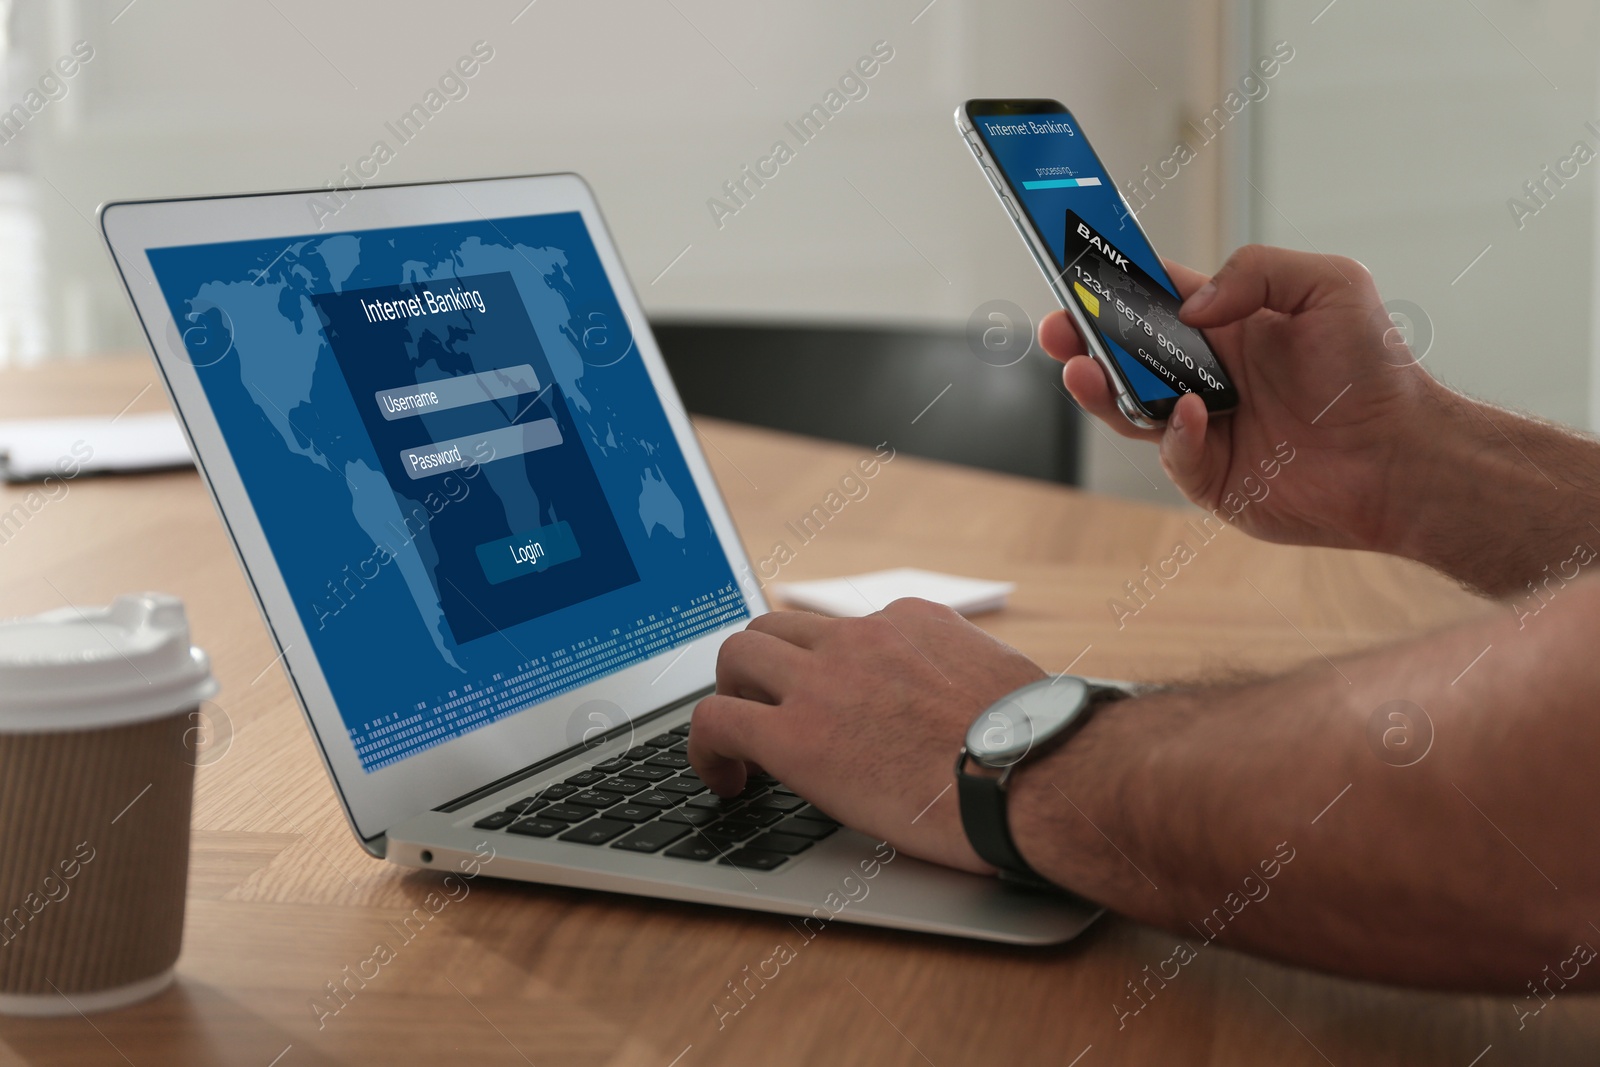 Image of Man using online banking application on laptop and smartphone at wooden table, closeup